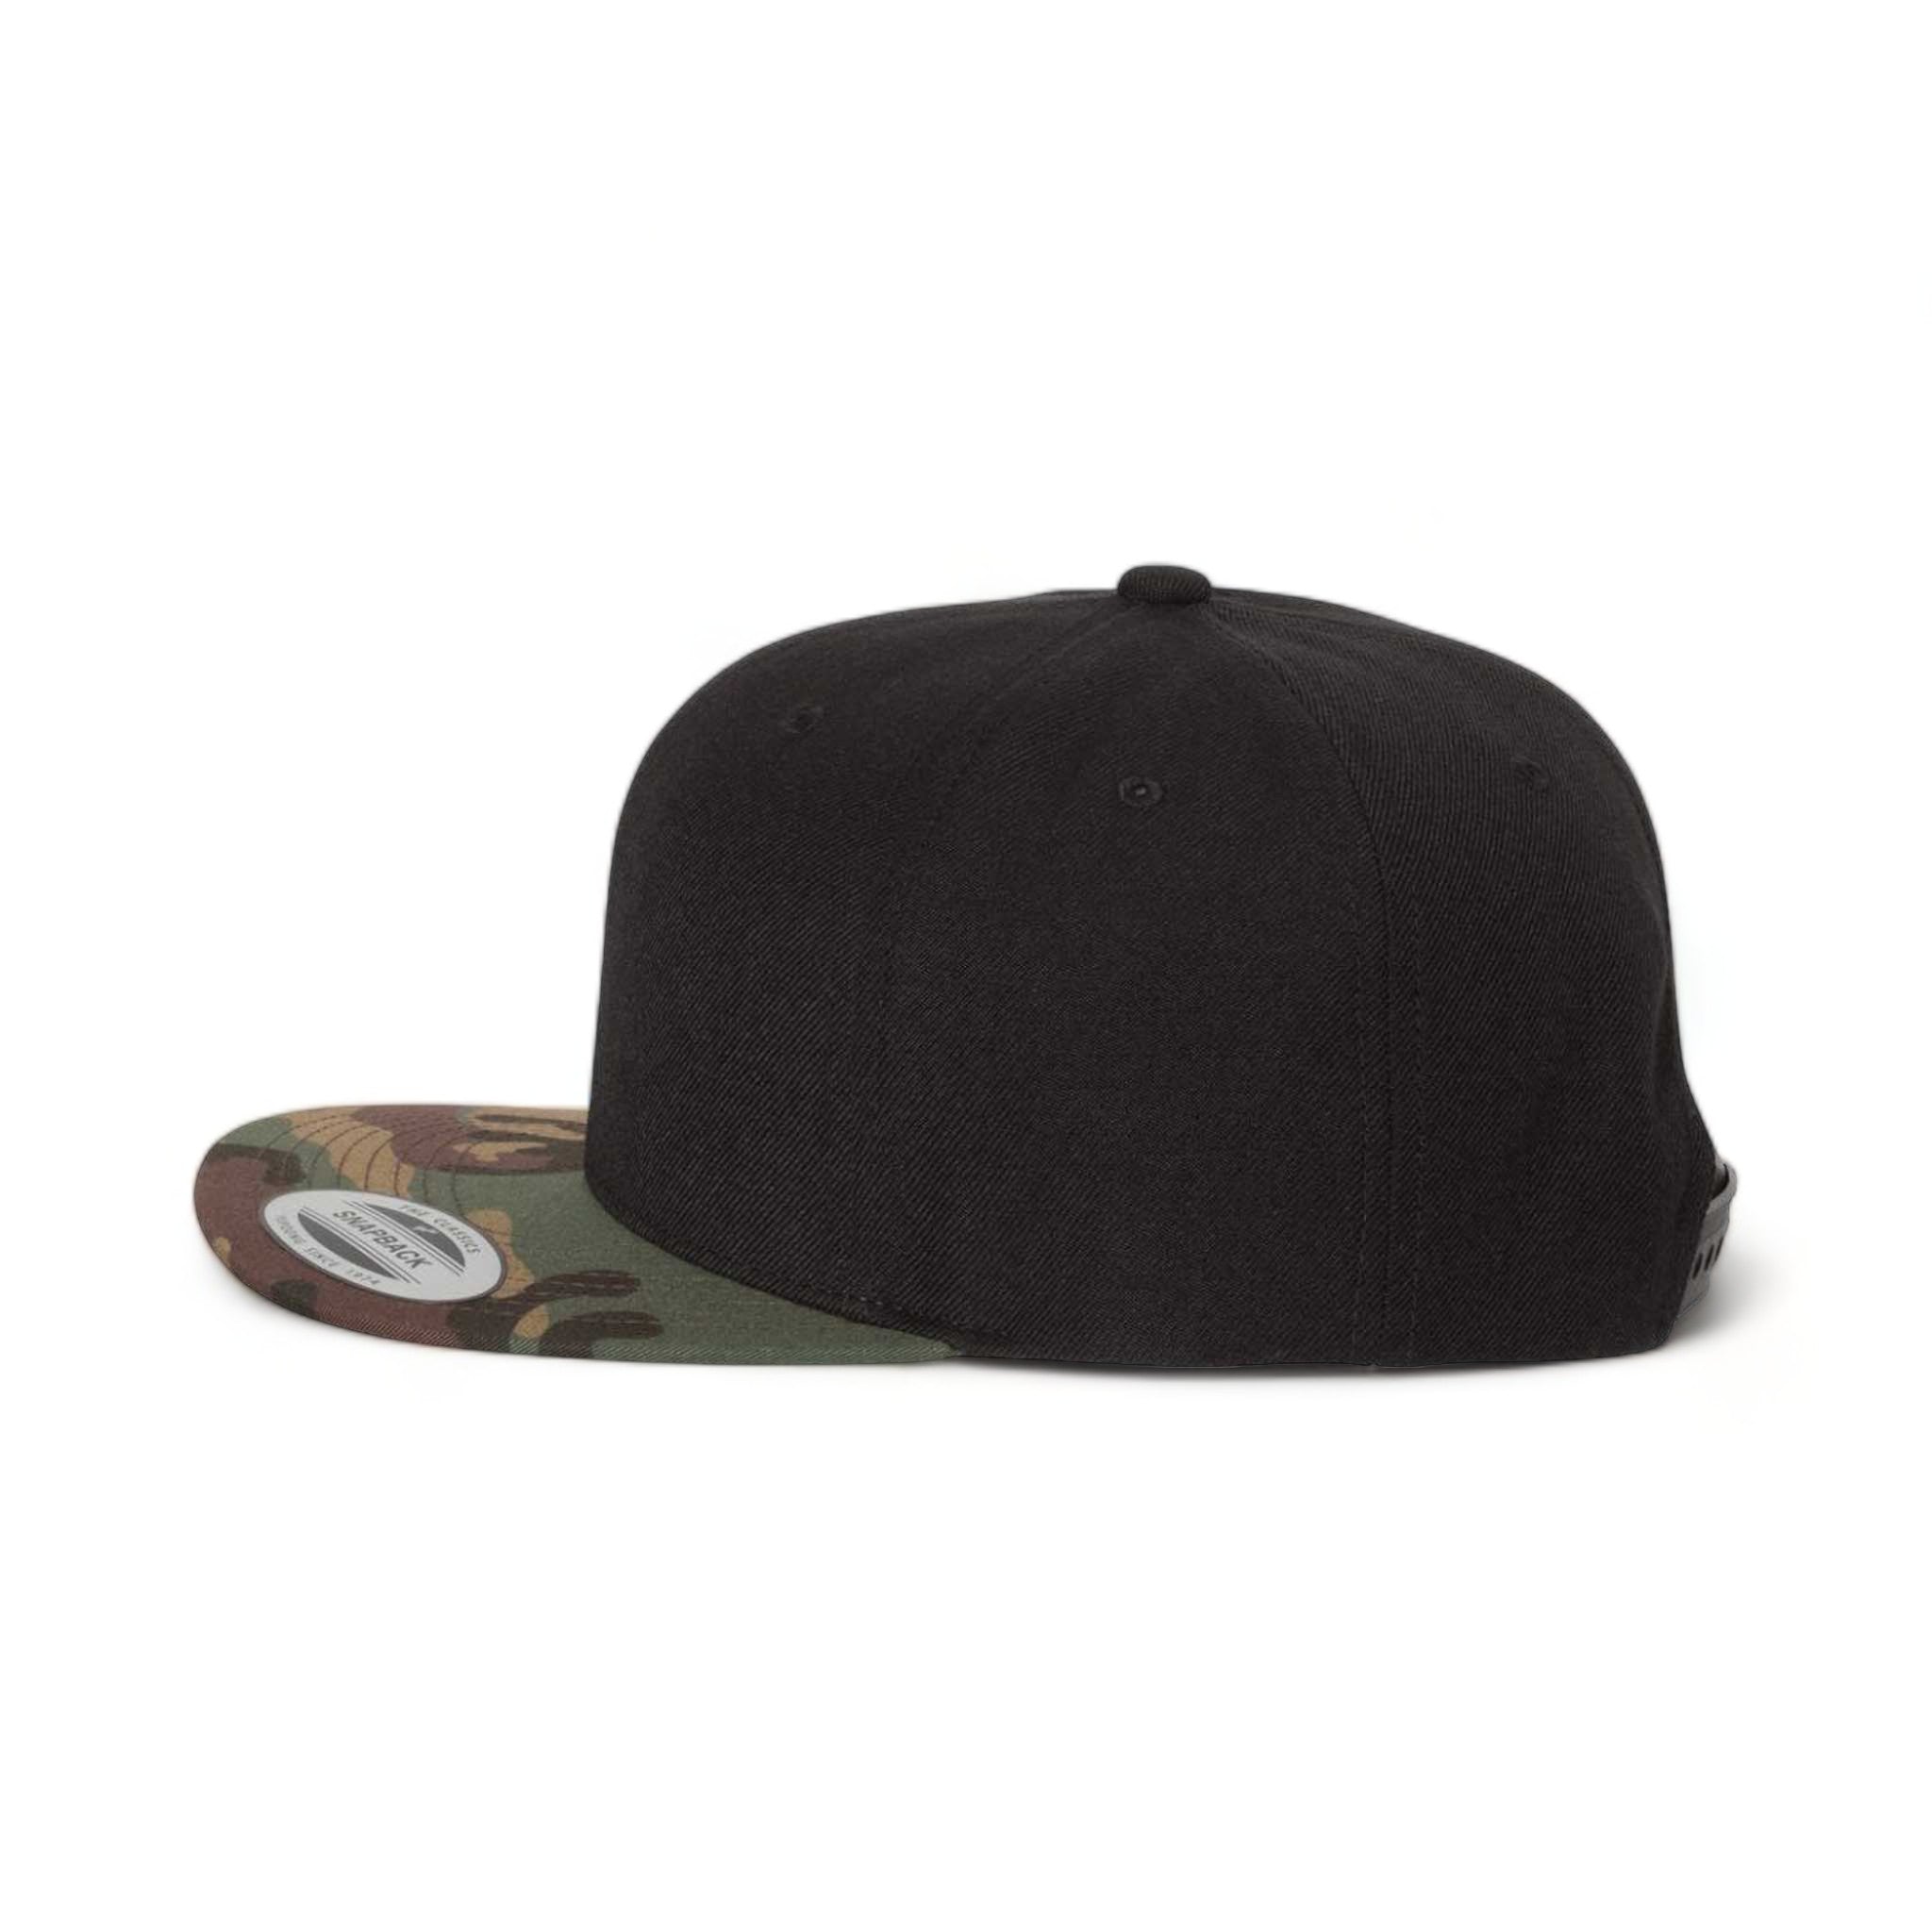 Side view of YP Classics 6089M custom hat in black and camo